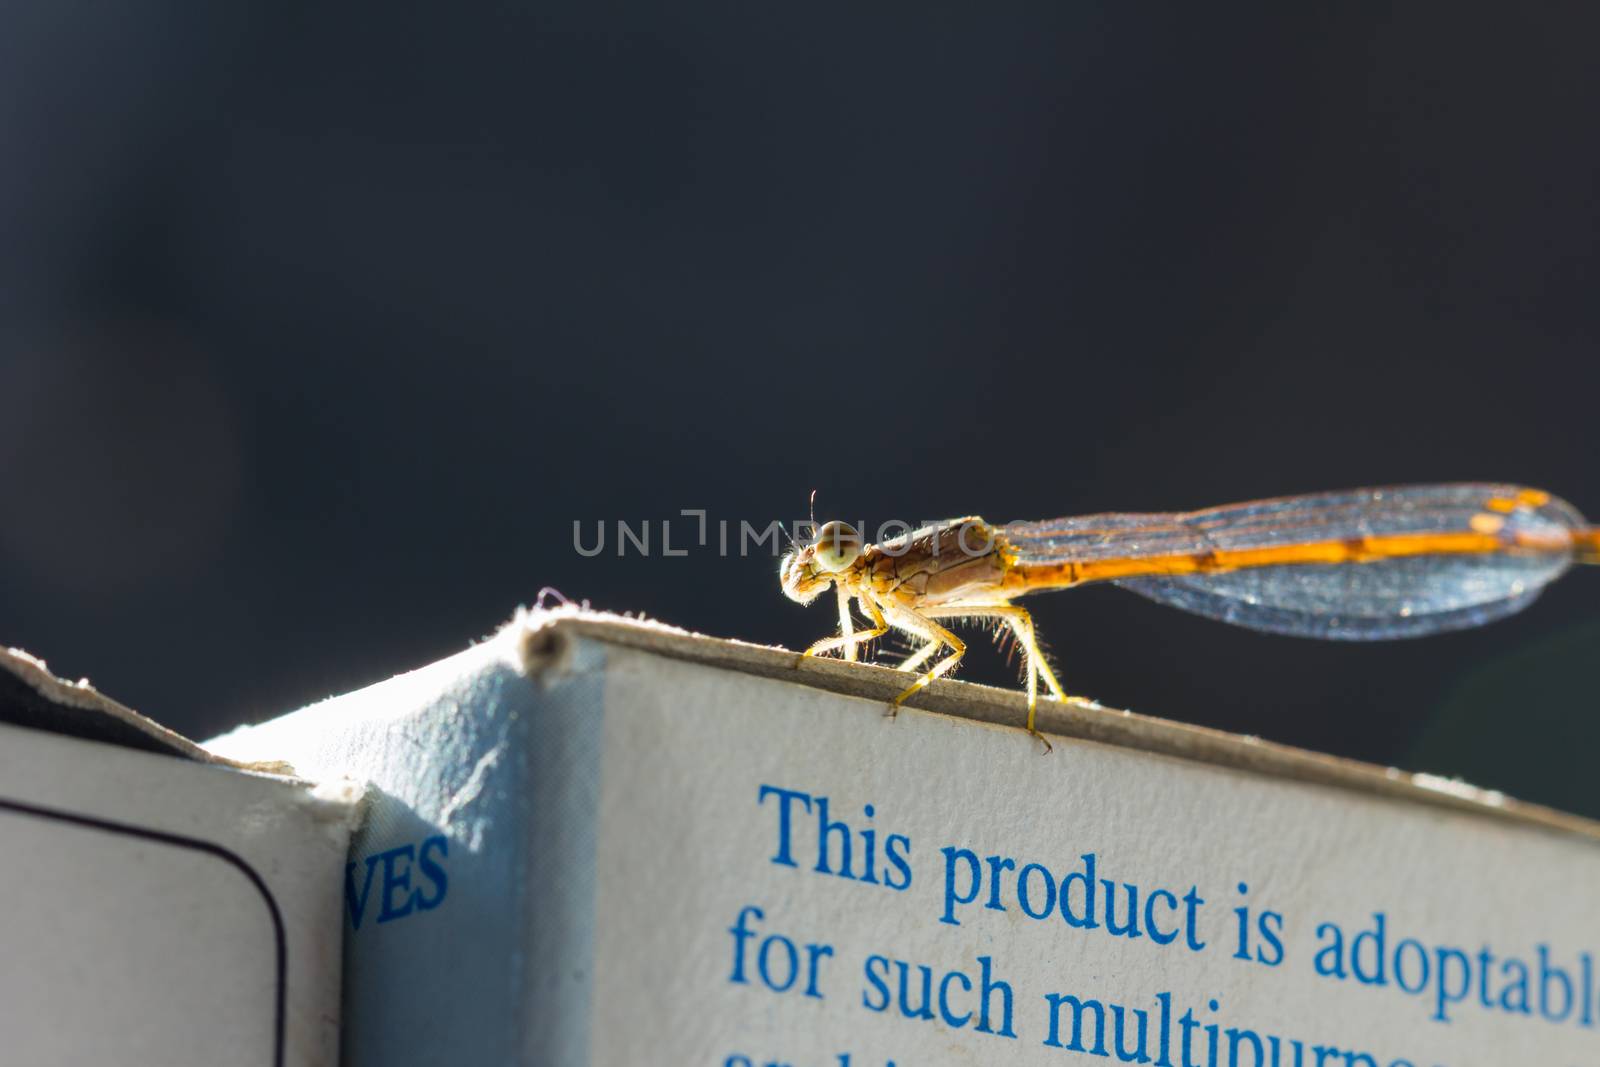 dragonfly on paper box, with copy space on background by a3701027